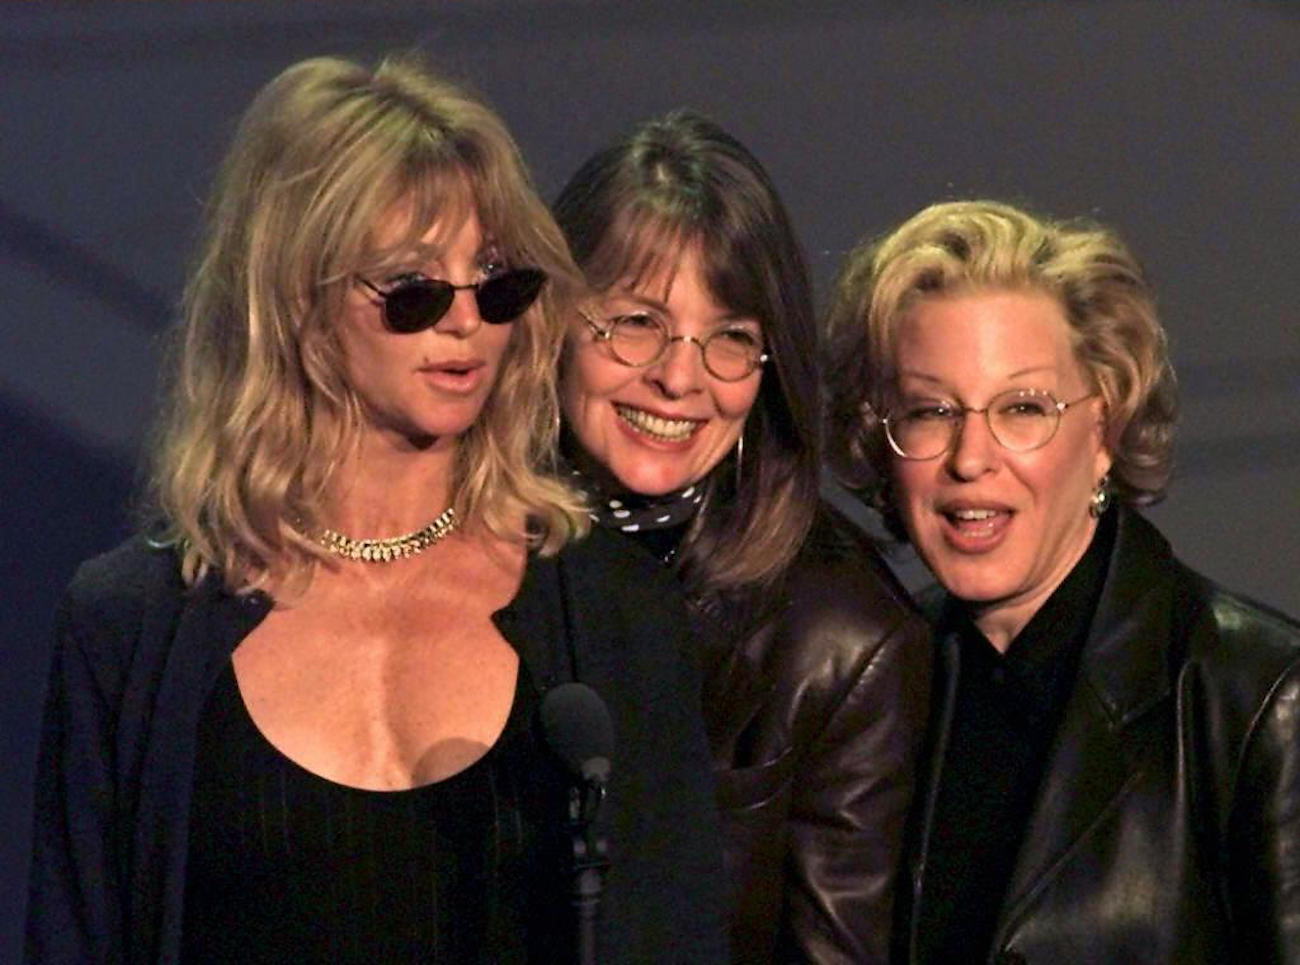 The First Wives Club stars Goldie Hawn, Bette Midler, Diane Keaton